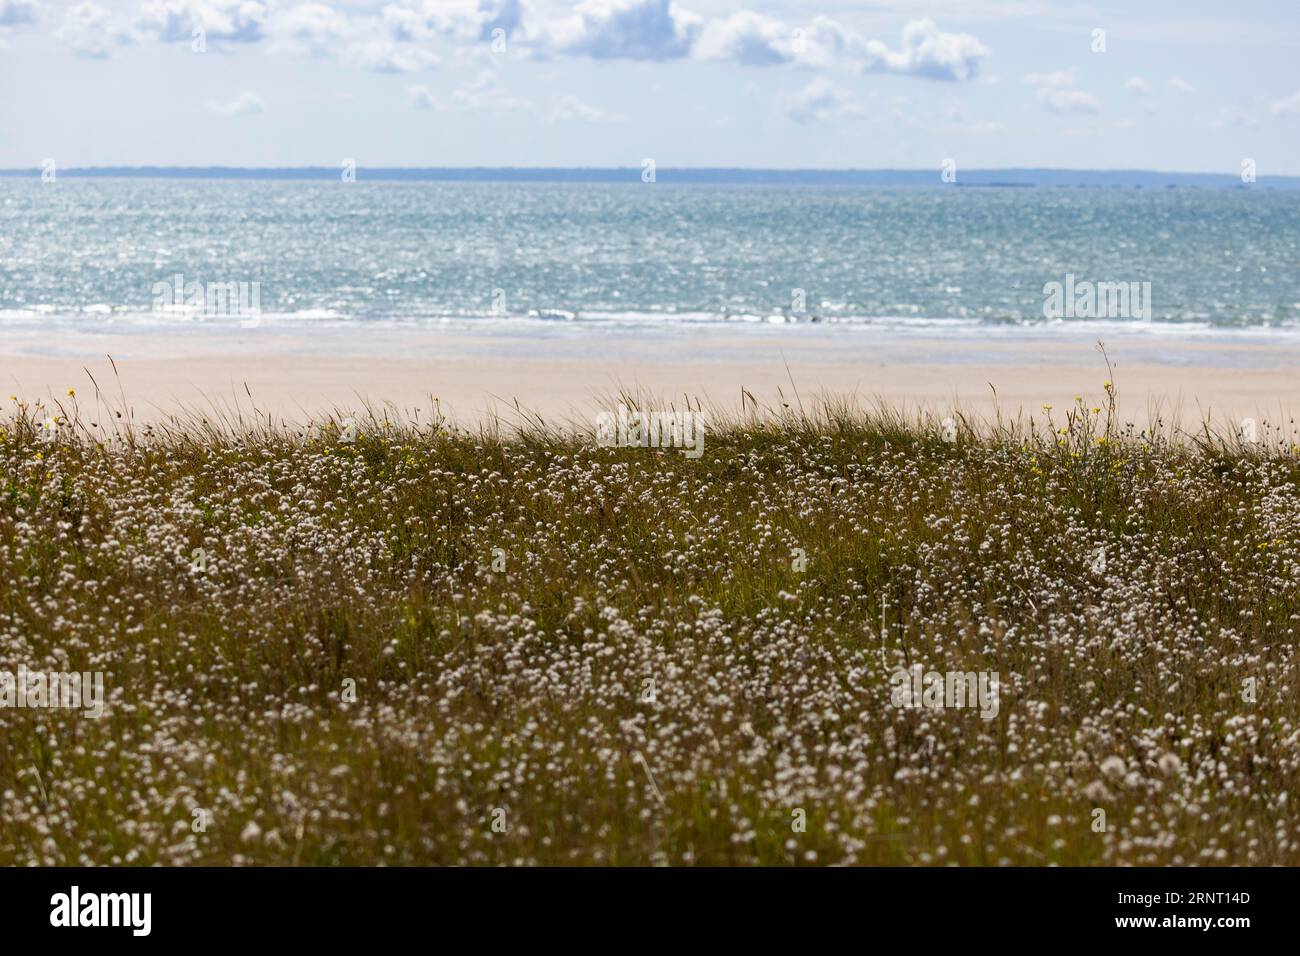 Summery, idyllic dune overgrown with hare's-tail grass or hares tail grass (Lagurus ovatus) and various other grasses in front of a light blue sea Stock Photo